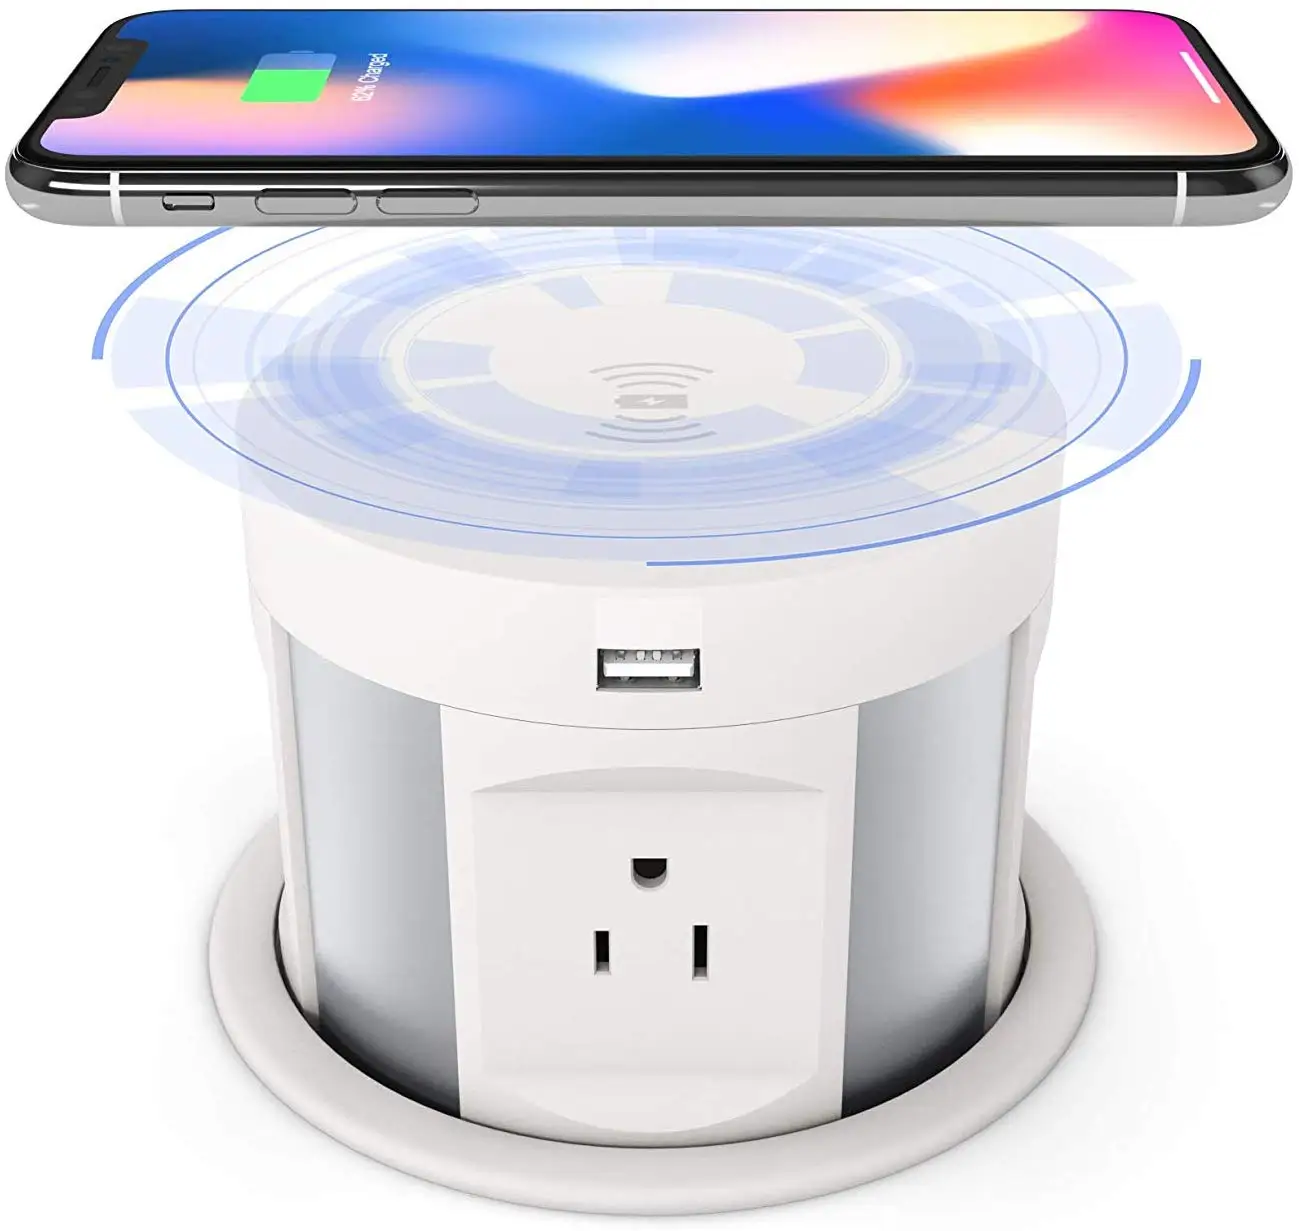 Details about   Table Socket Power Strip Pop Up Pull Power With USB Charger For Office Kitchen 